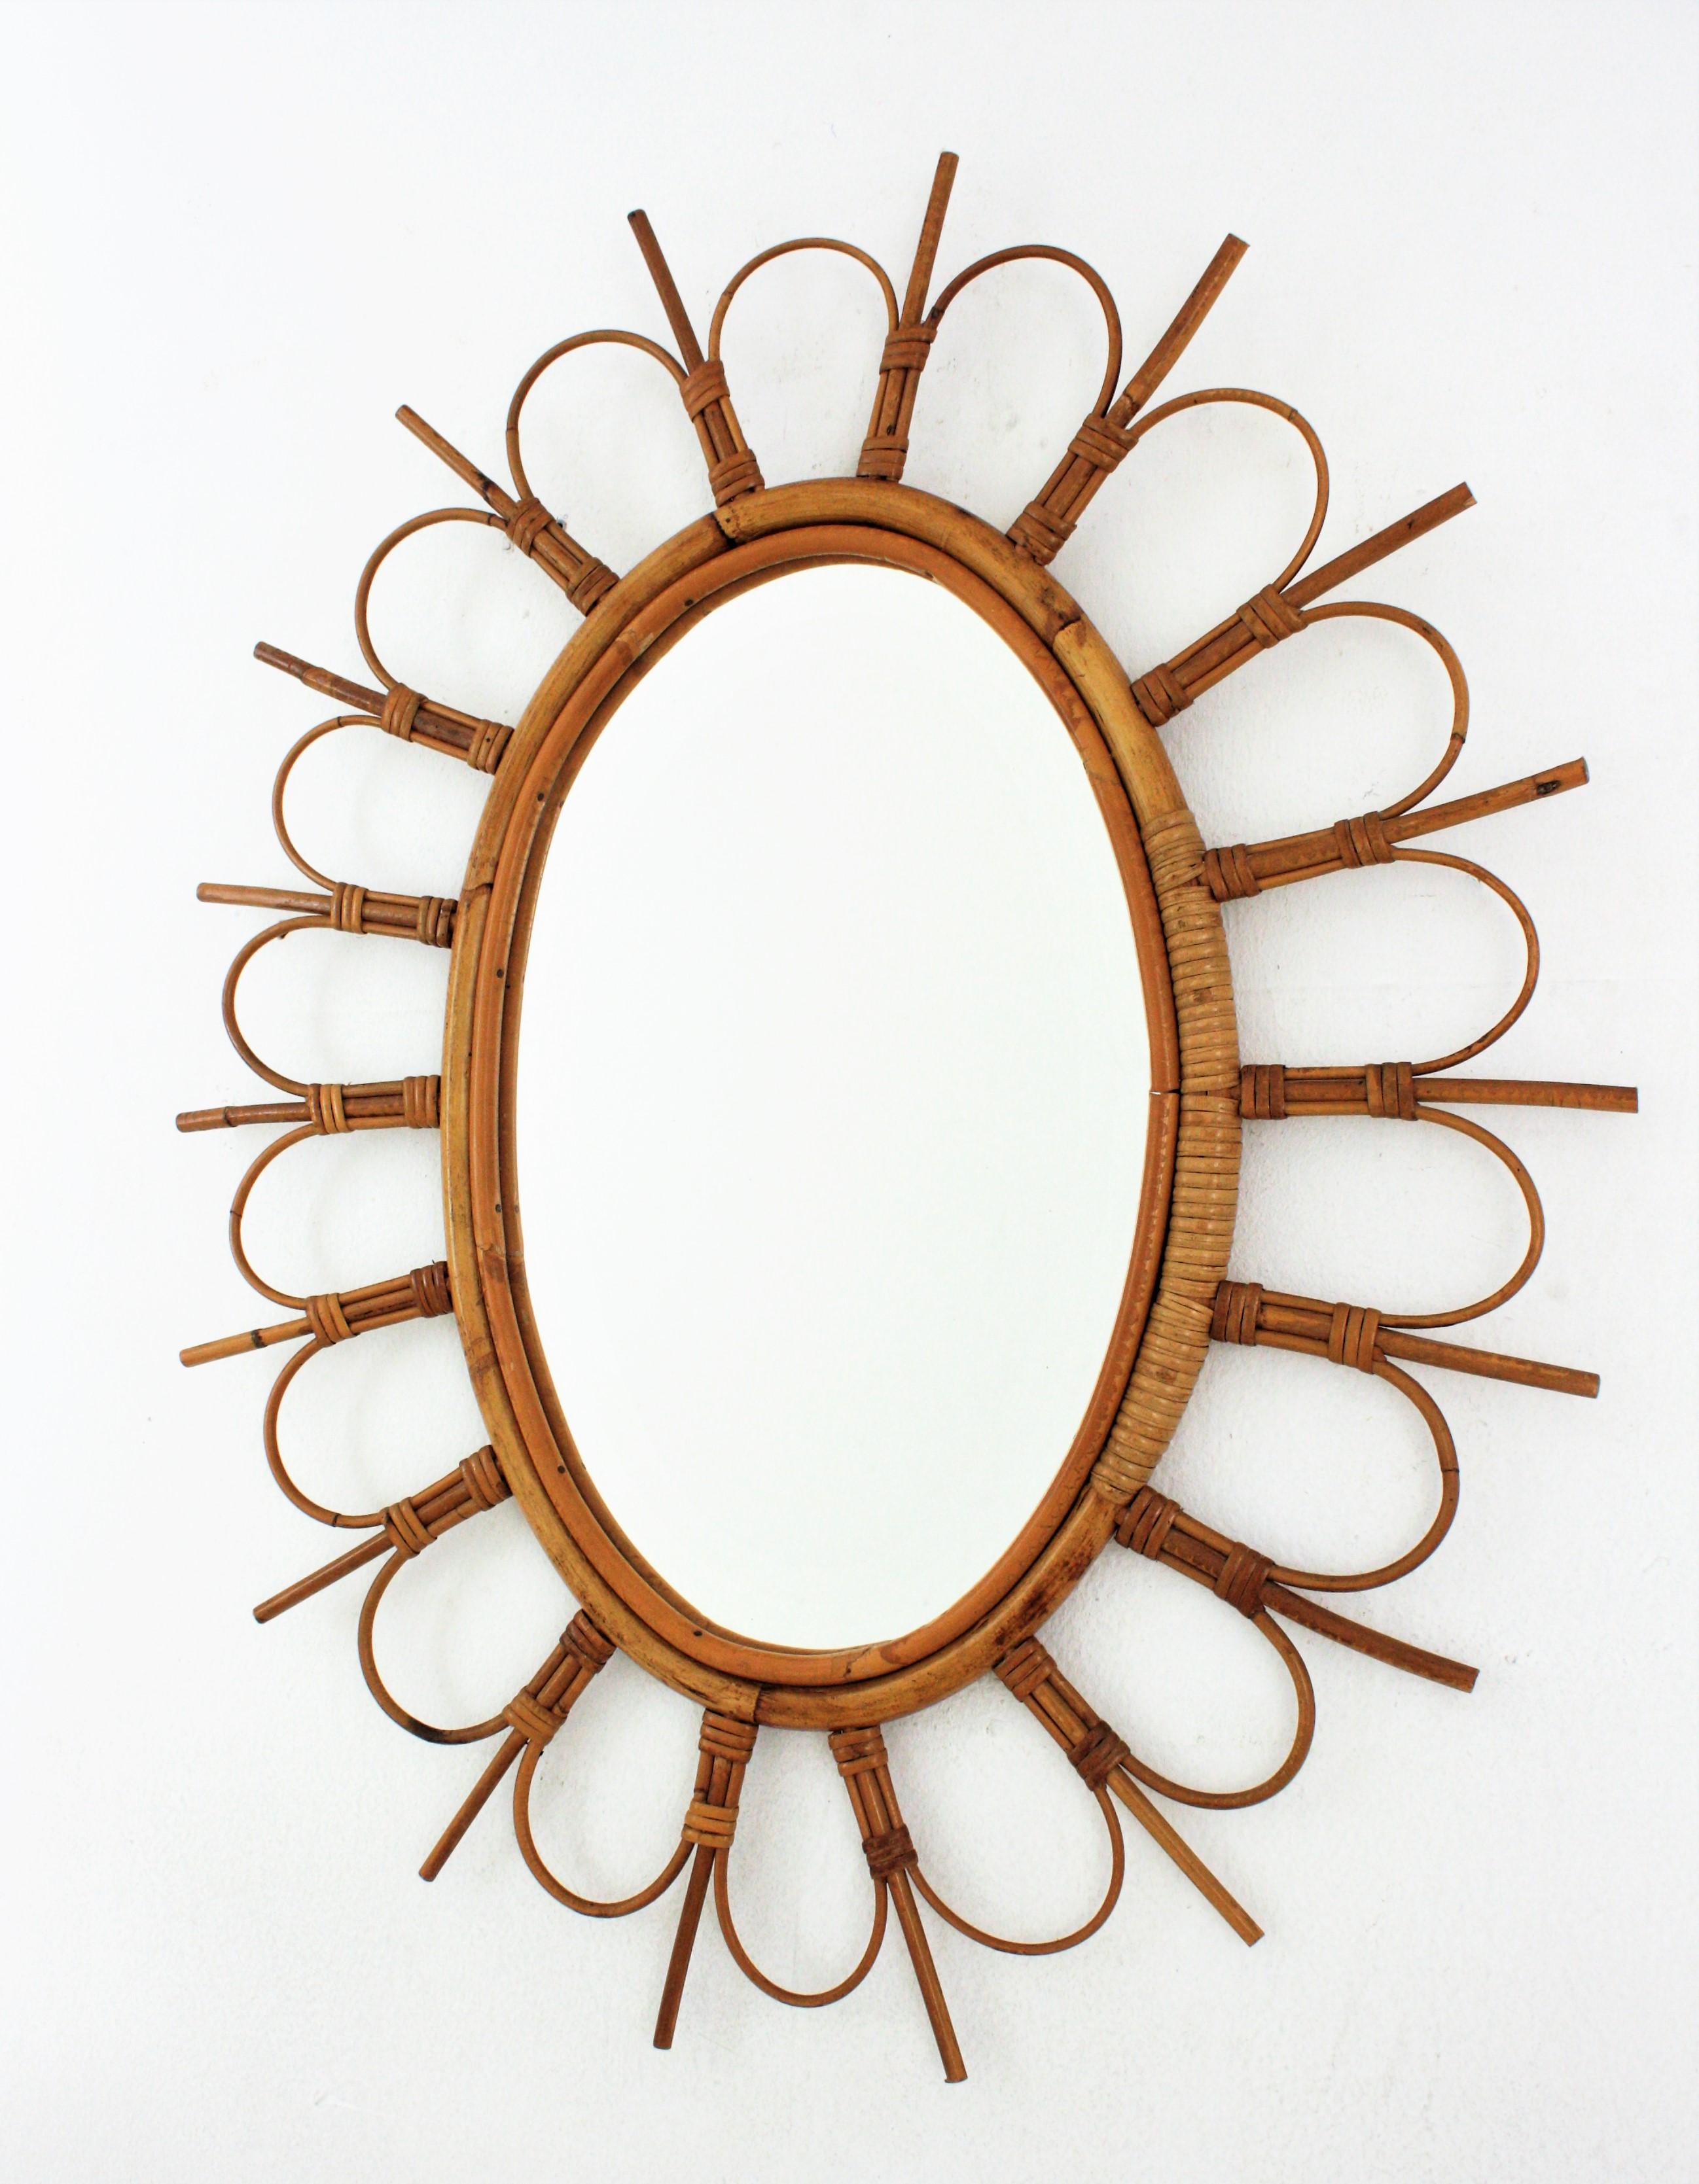 Hand-Crafted Rattan Oval Sunburst Flower Mirror from France, 1960s For Sale